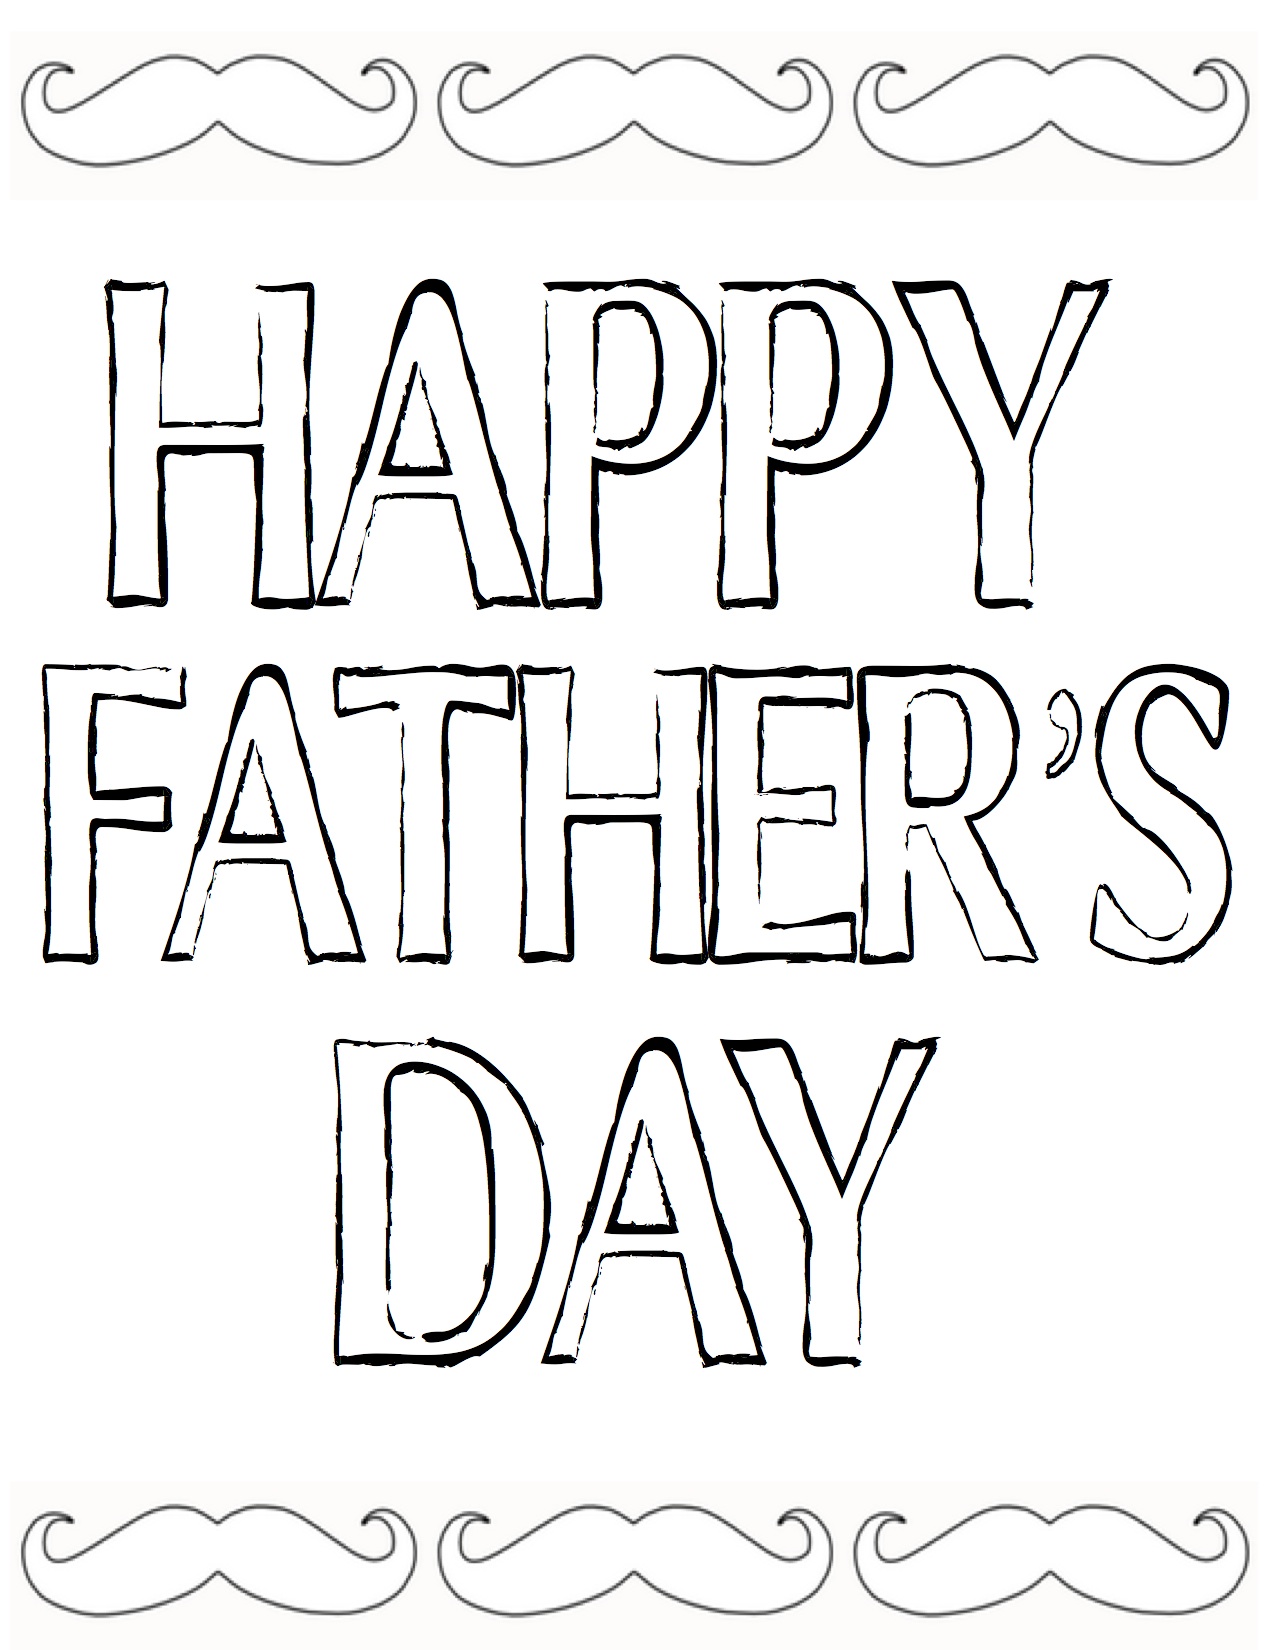 father-s-day-printable-cards